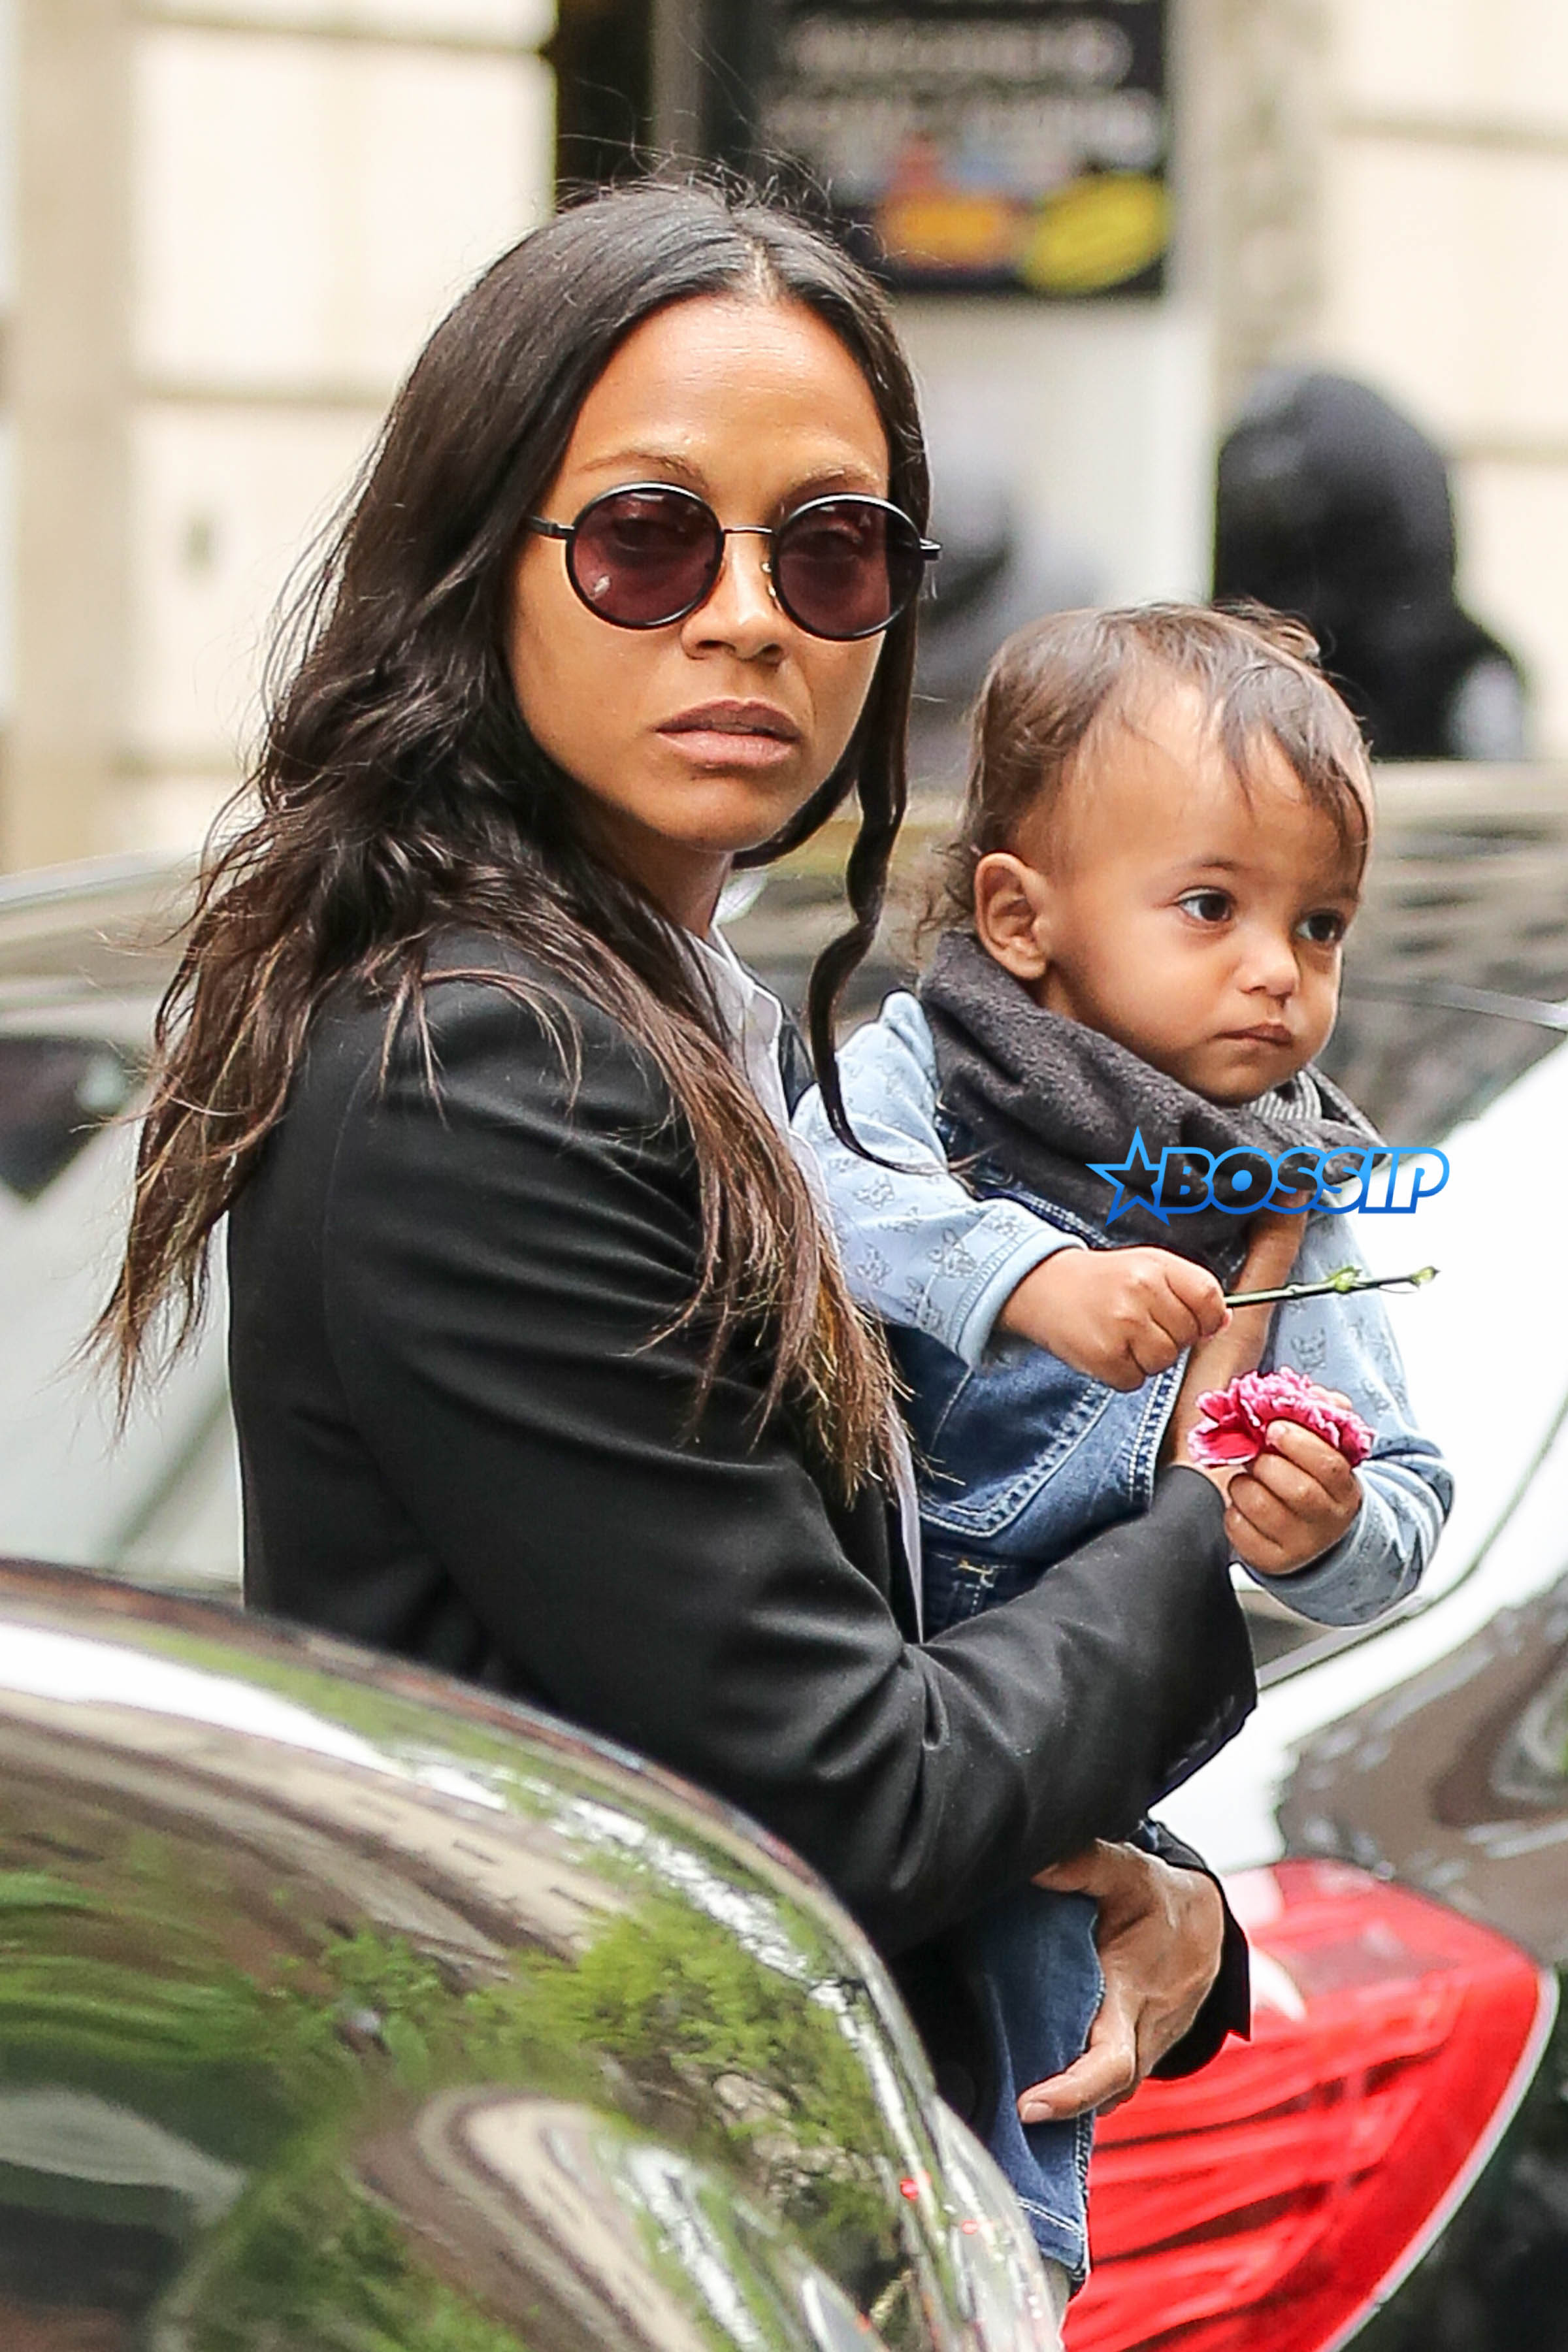 Zoe Saldana and Marco Perego seen carrying their kids while their where checking out their hotel in New York City